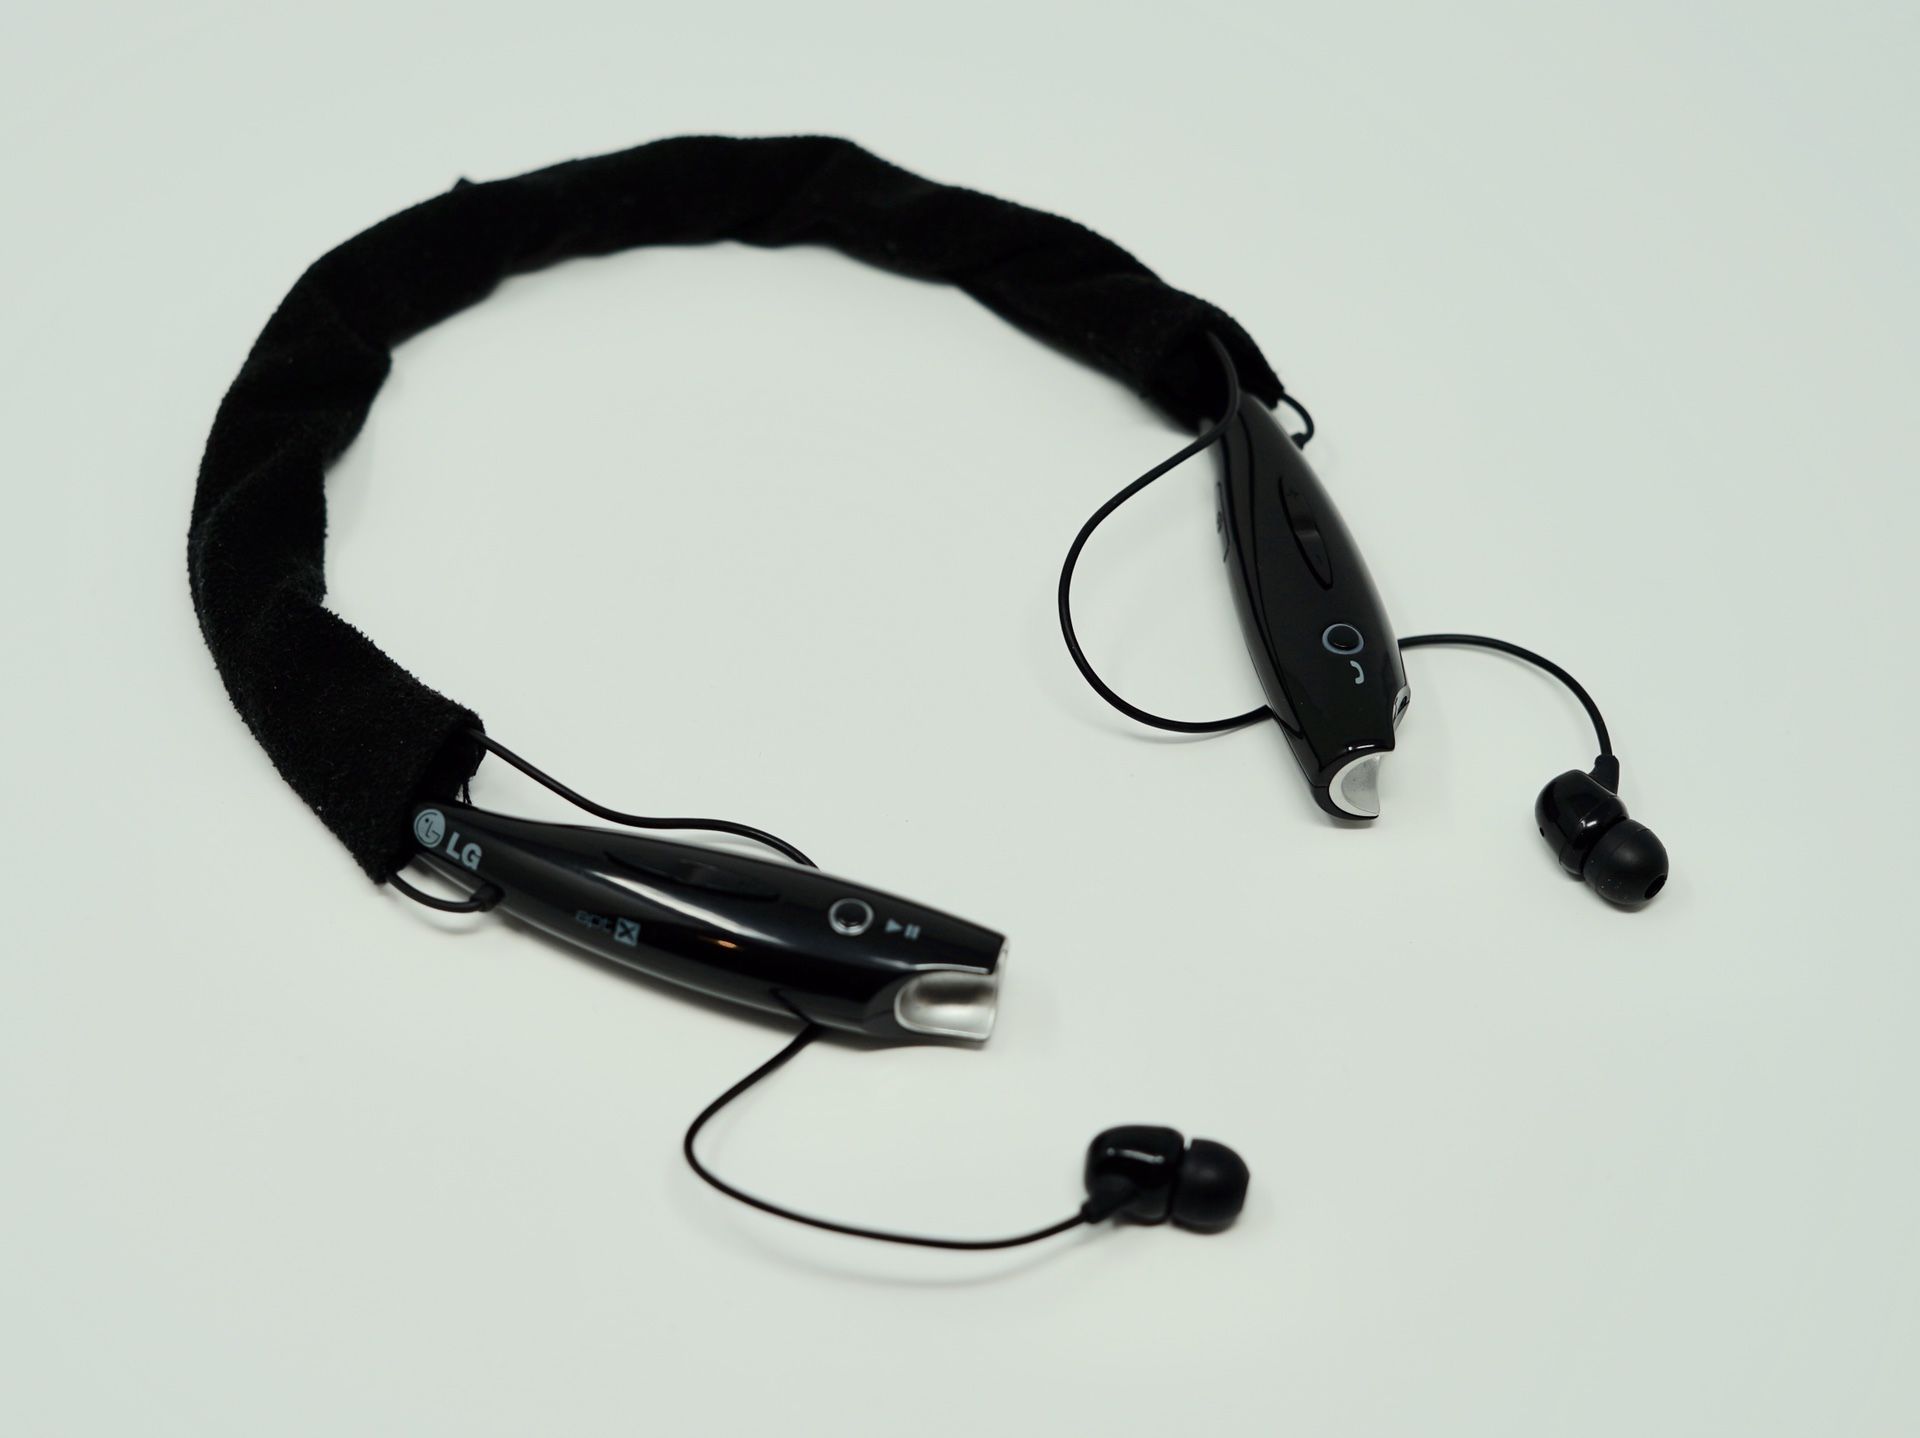 LG Tone HBS-730 Bluetooth Wireless Stereo Headset (Black) with case and neck wrap